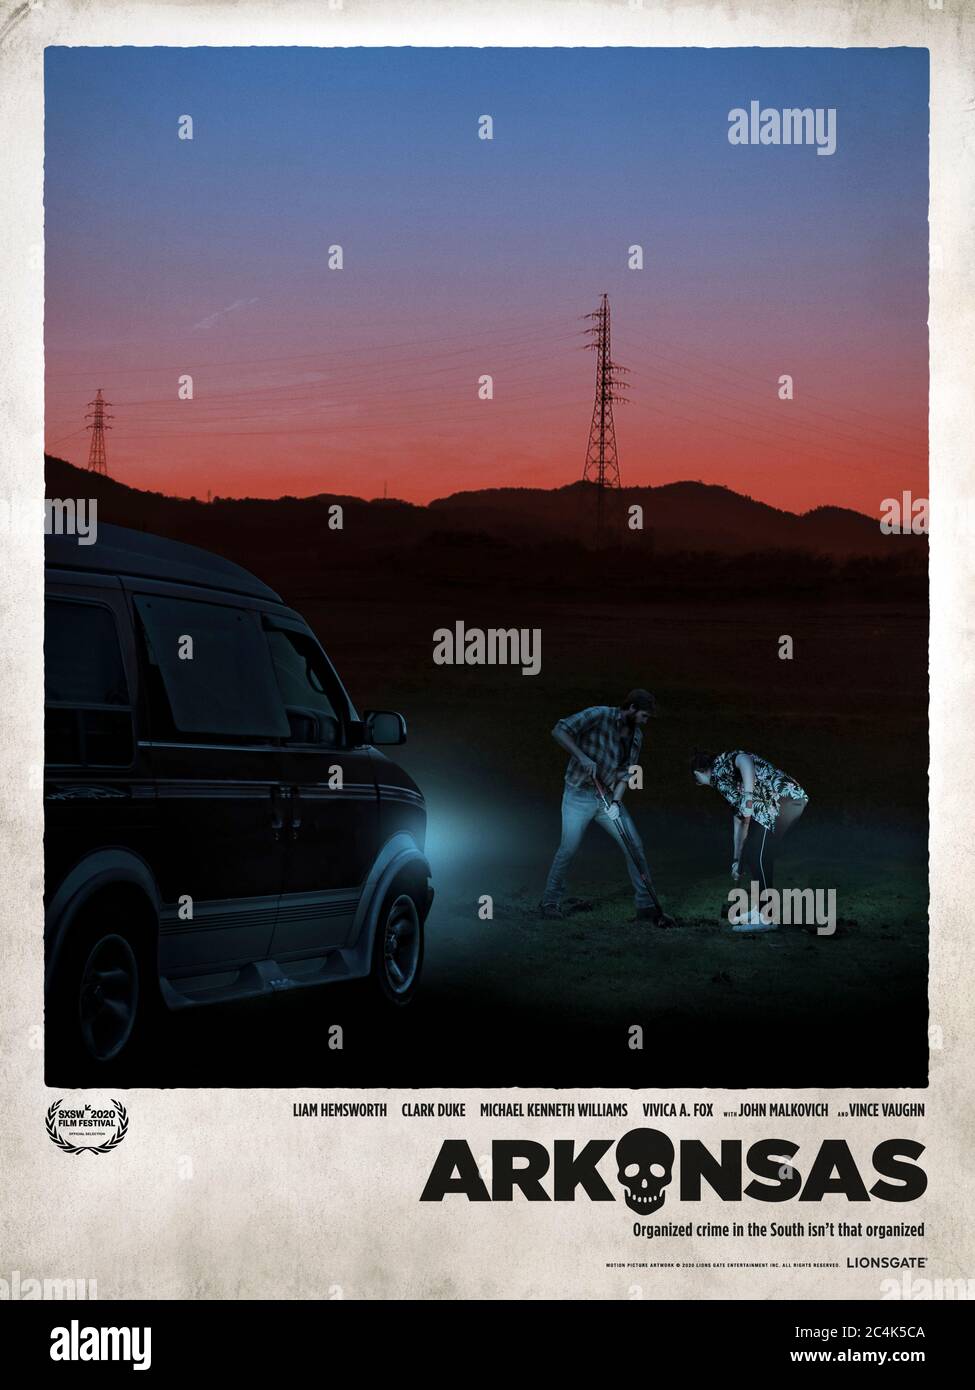 Arkansas (2020) directed by Clark Duke and starring Liam Hemsworth, Vince Vaughn, Clark Duke, John Malkovich and Michael Kenneth Williams. Thriller about drug dealers trying to expand their share in a dog eat dog world. Stock Photo